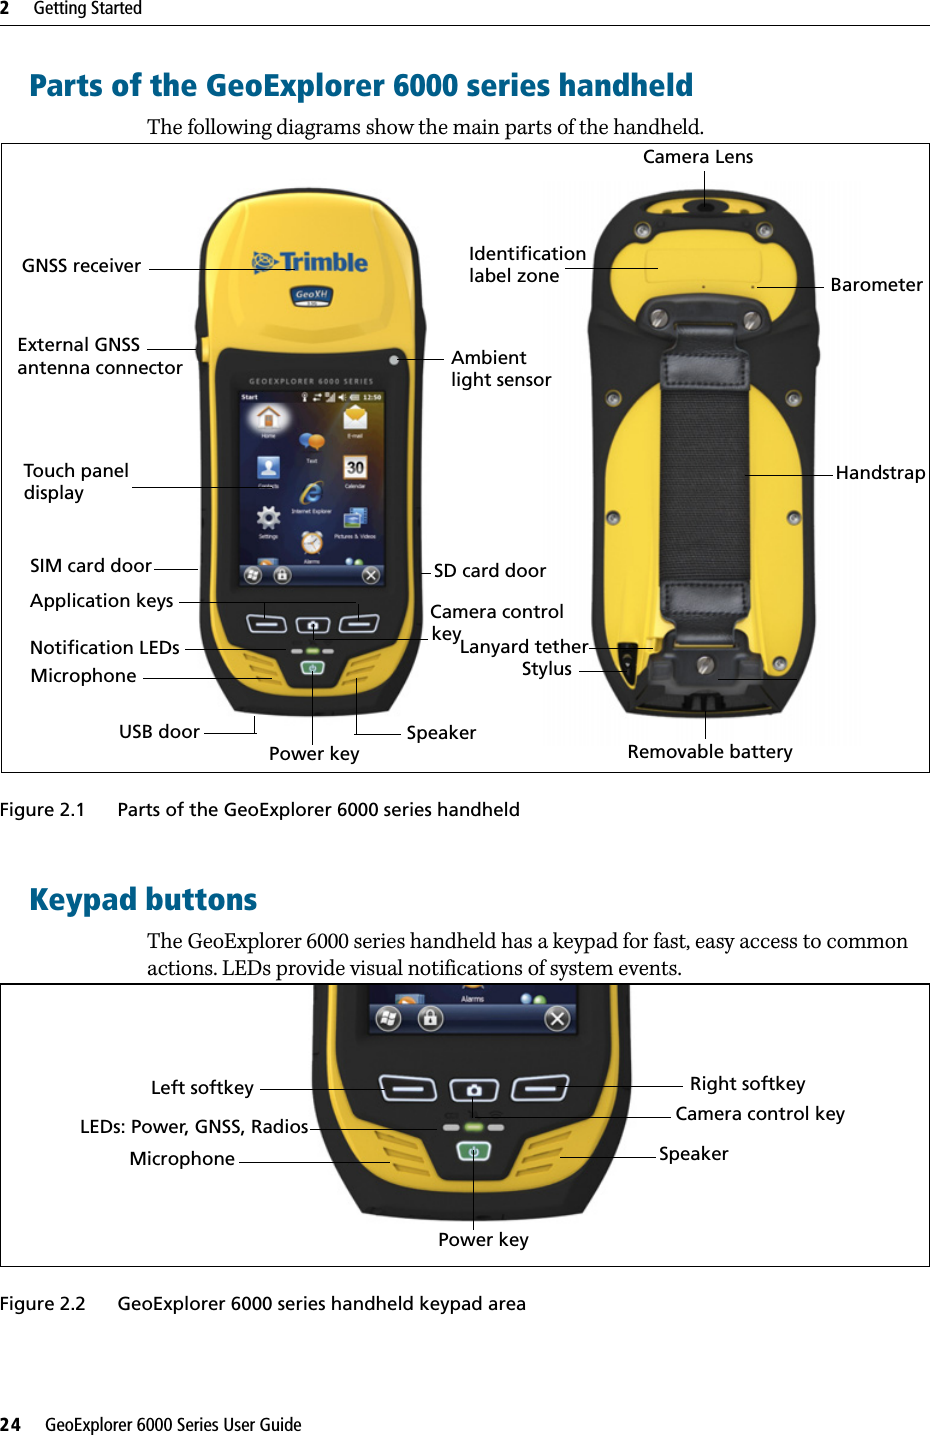 2     Getting Started24     GeoExplorer 6000 Series User GuideParts of the GeoExplorer 6000 series handheldThe following diagrams show the main parts of the handheld.Figure 2.1 Parts of the GeoExplorer 6000 series handheldKeypad buttonsThe GeoExplorer 6000 series handheld has a keypad for fast, easy access to common actions. LEDs provide visual notifications of system events.  Figure 2.2 GeoExplorer 6000 series handheld keypad areaCamera LensHandstrapRemovable batteryLanyard tetherStylusGNSS receiverExternal GNSSantenna connectorTouch panelSIM card door SD card doorApplication keys Camera controlkeyPower keyUSB doorNotification LEDsMicrophoneSpeakerBarometerdisplayIdentificationlabel zoneAmbientlight sensorLeft softkey Right softkeyCamera control keySpeakerPower keyMicrophoneLEDs: Power, GNSS, Radios